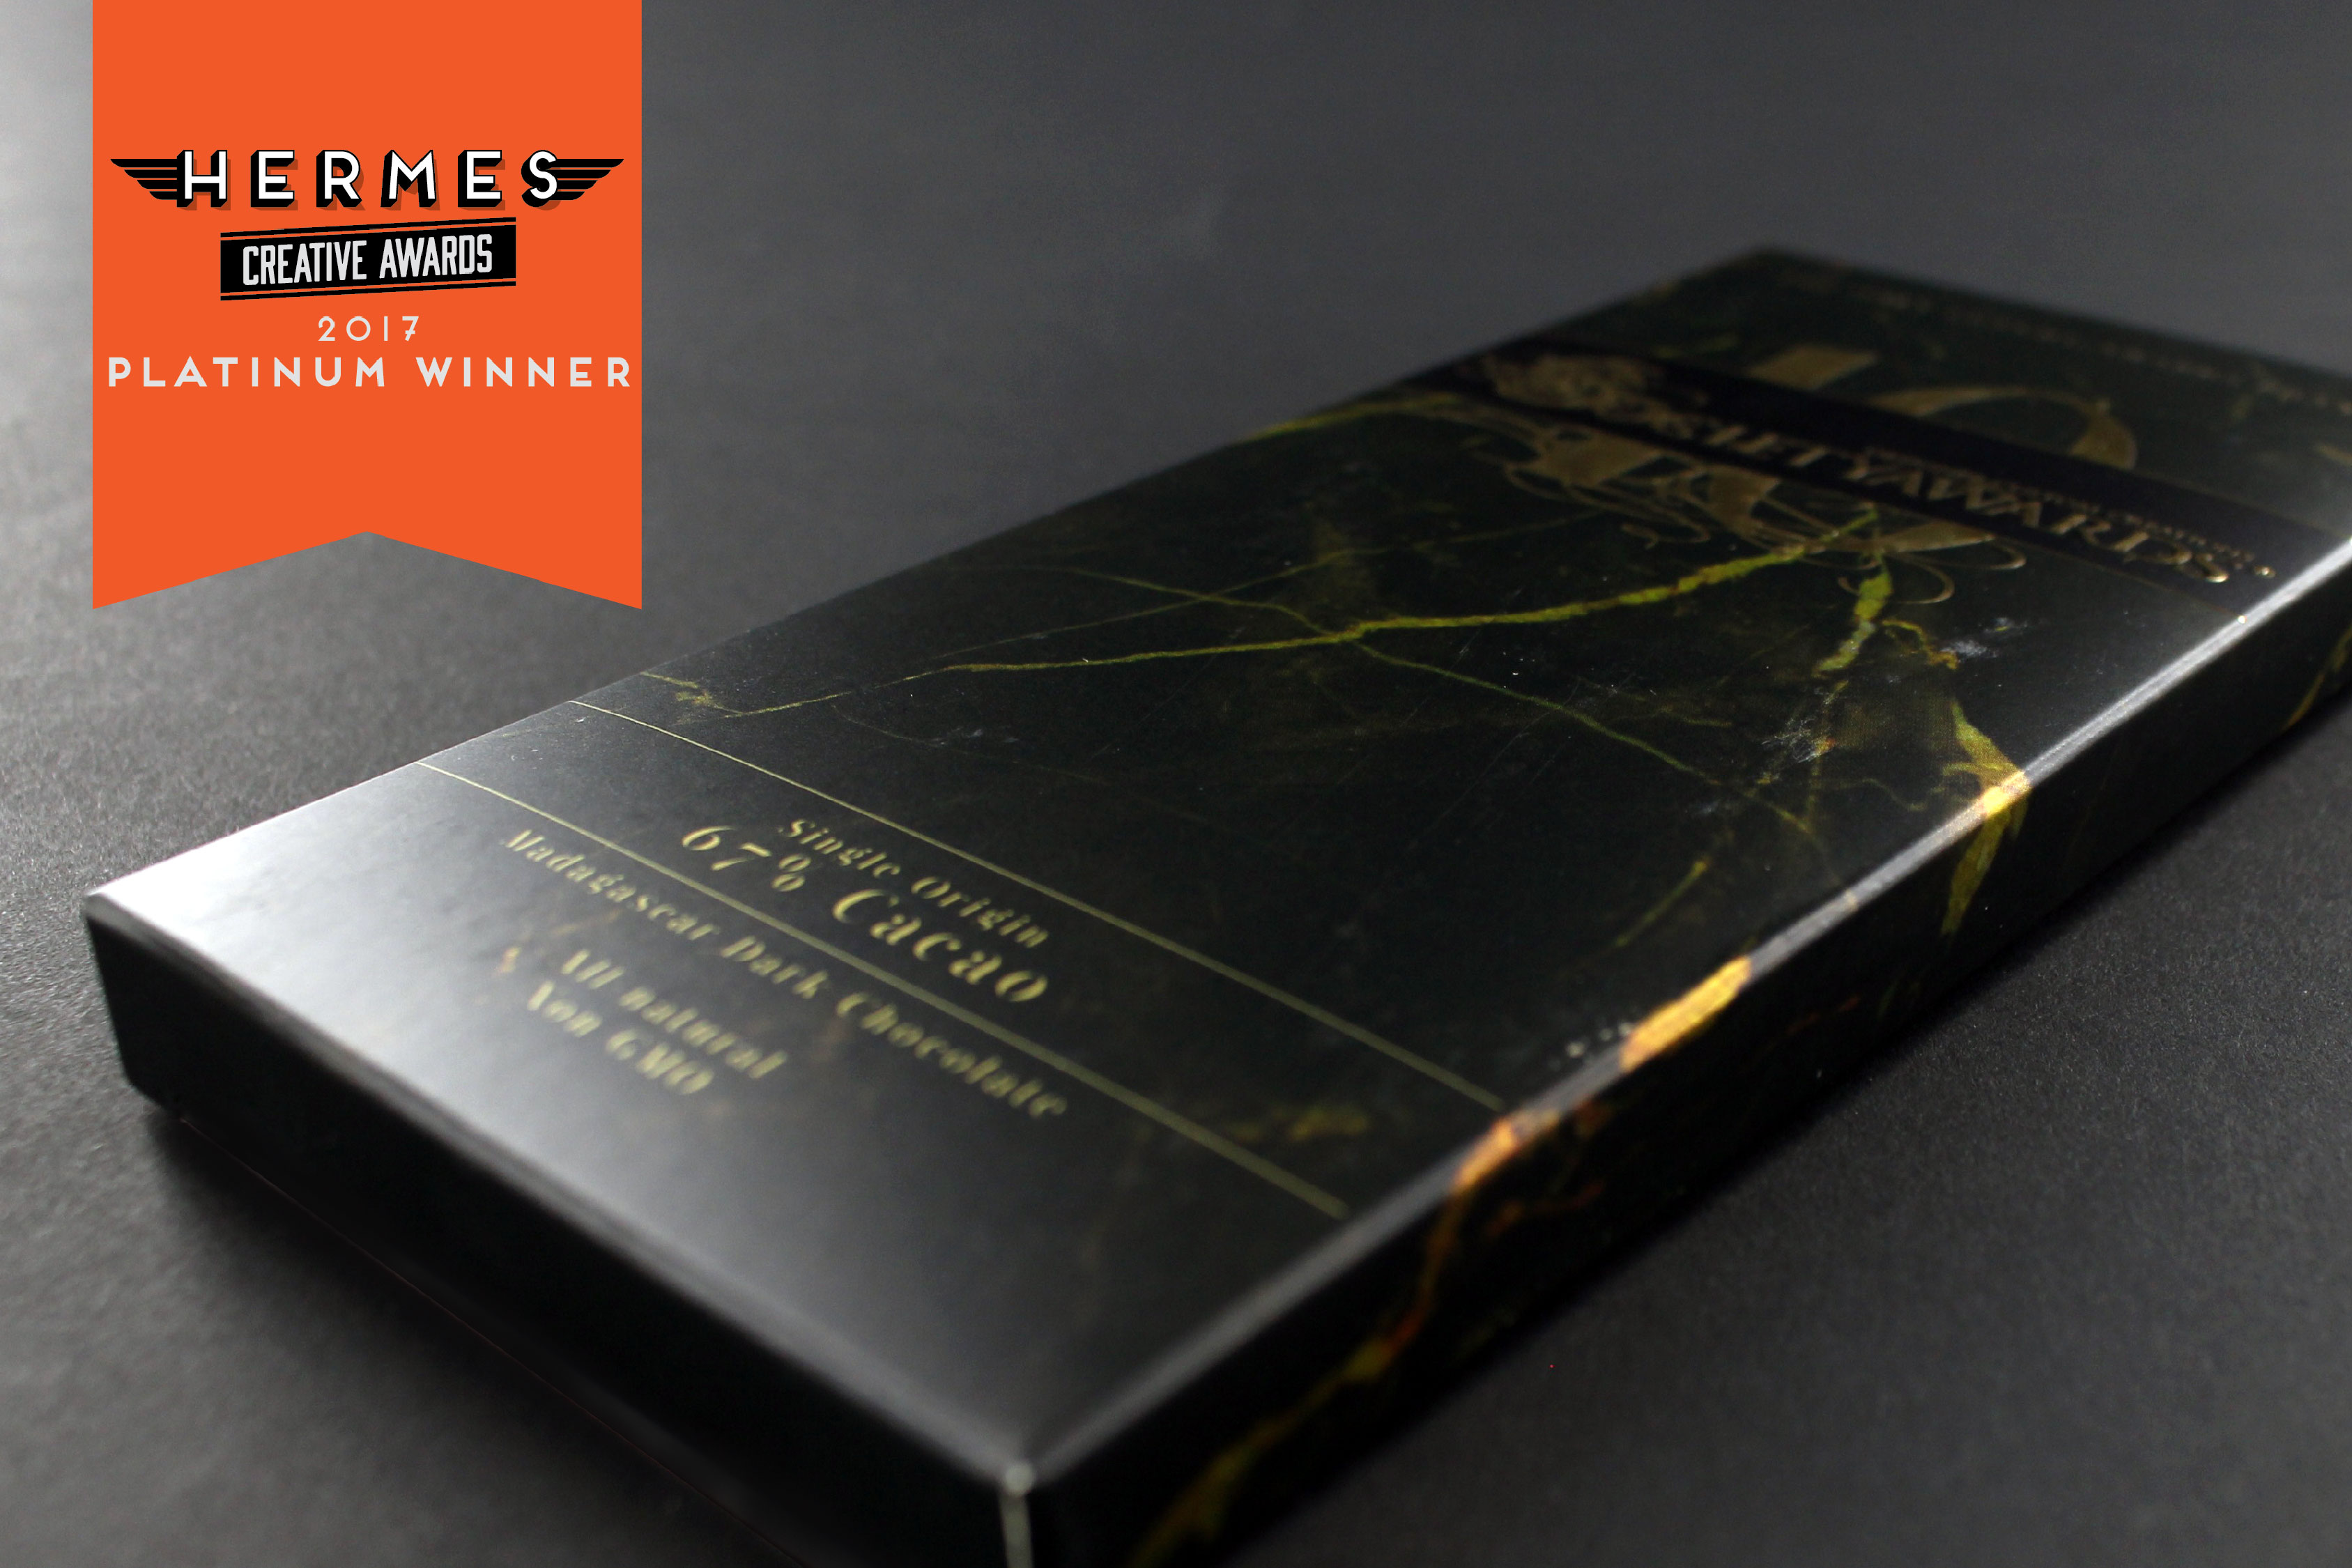 Chocolate bar box from the Society Awards 10 Year Chocolate. Box uses metallic paperboard, metallic ink, custom graphics, gold foil